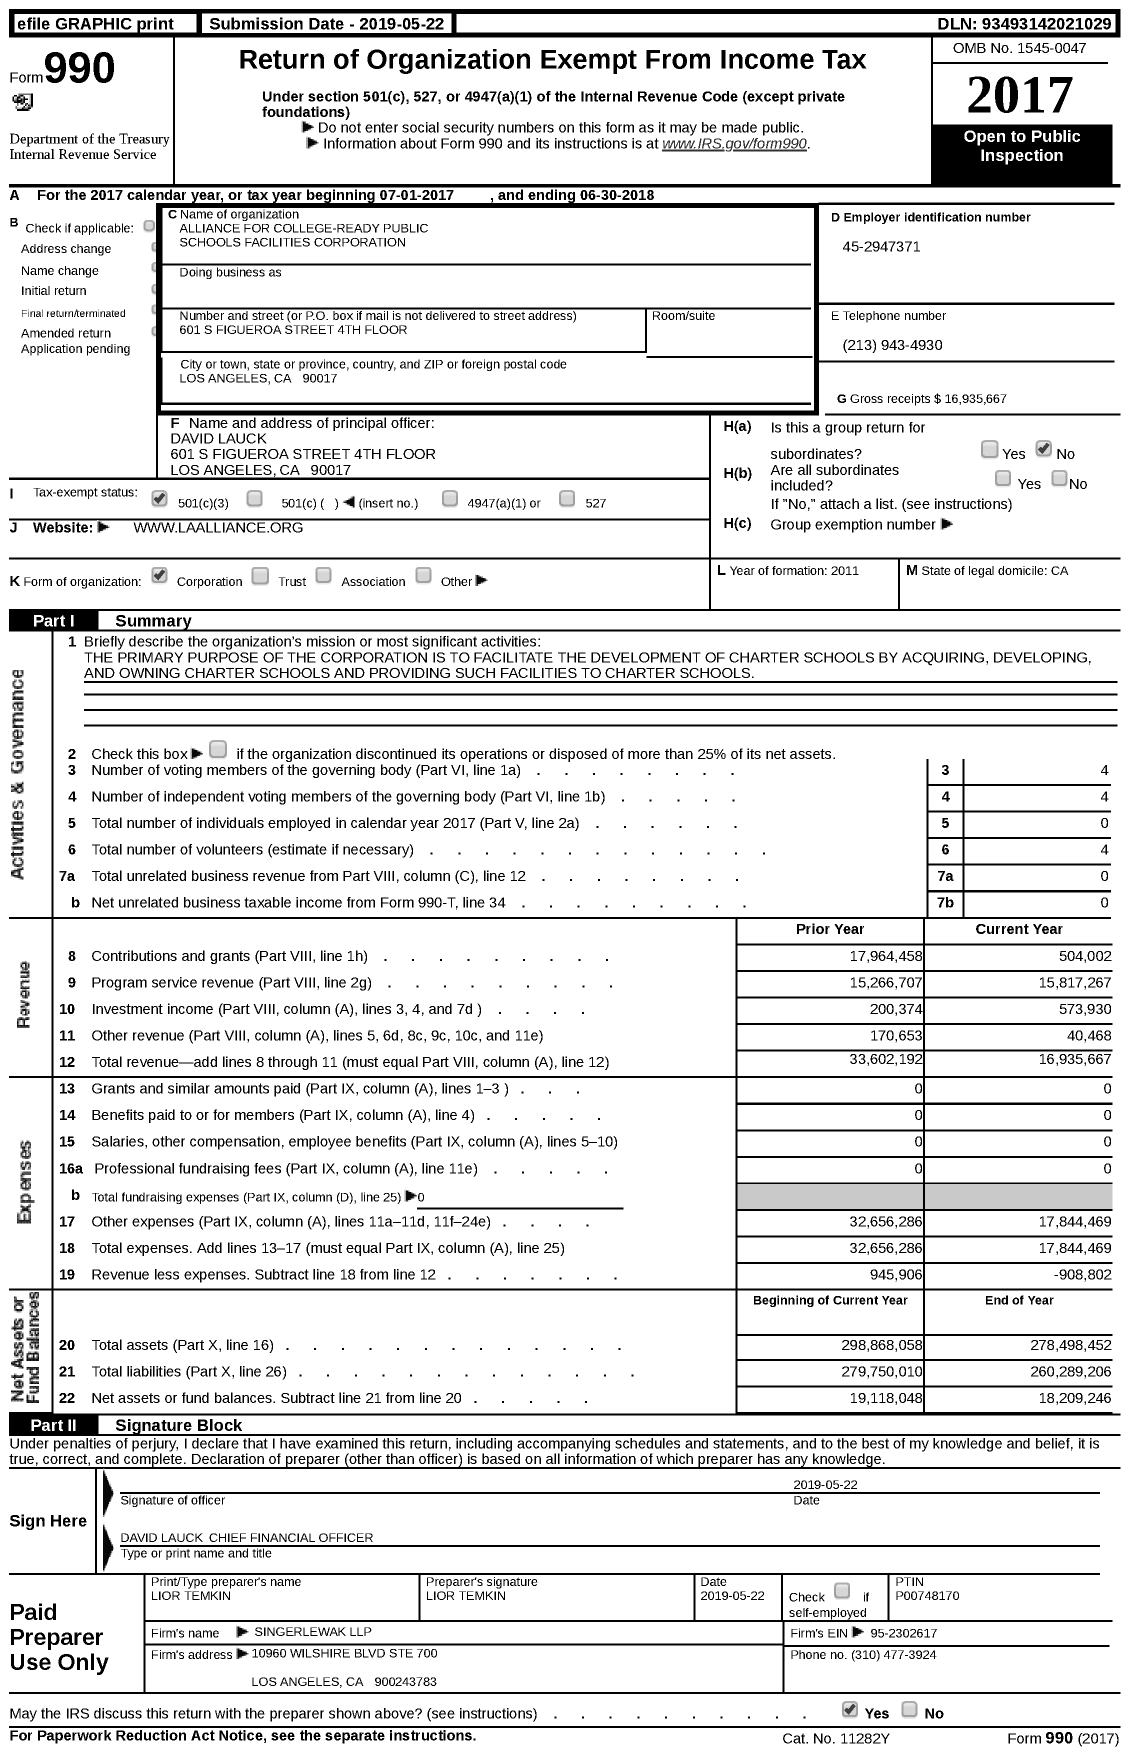 Image of first page of 2017 Form 990 for Alliance for College-Ready Public Schools Facilities Corporation